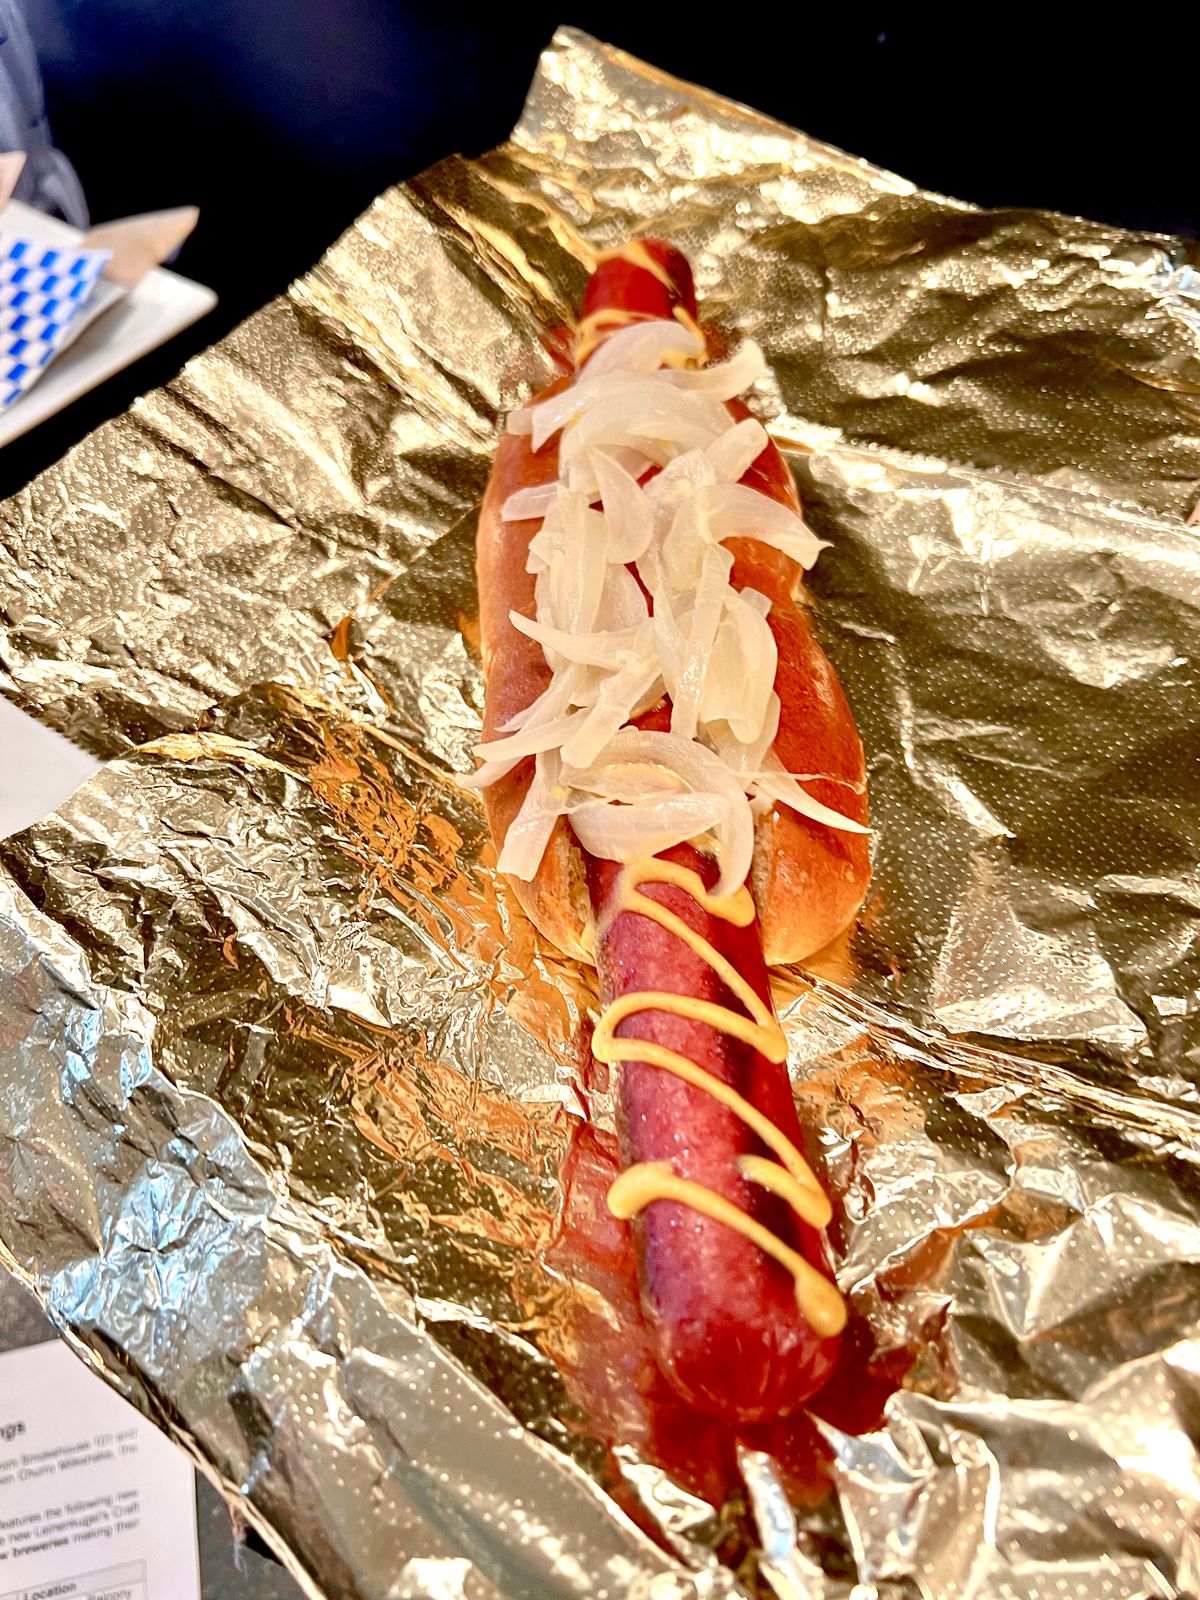 A giant hot dog with onions.